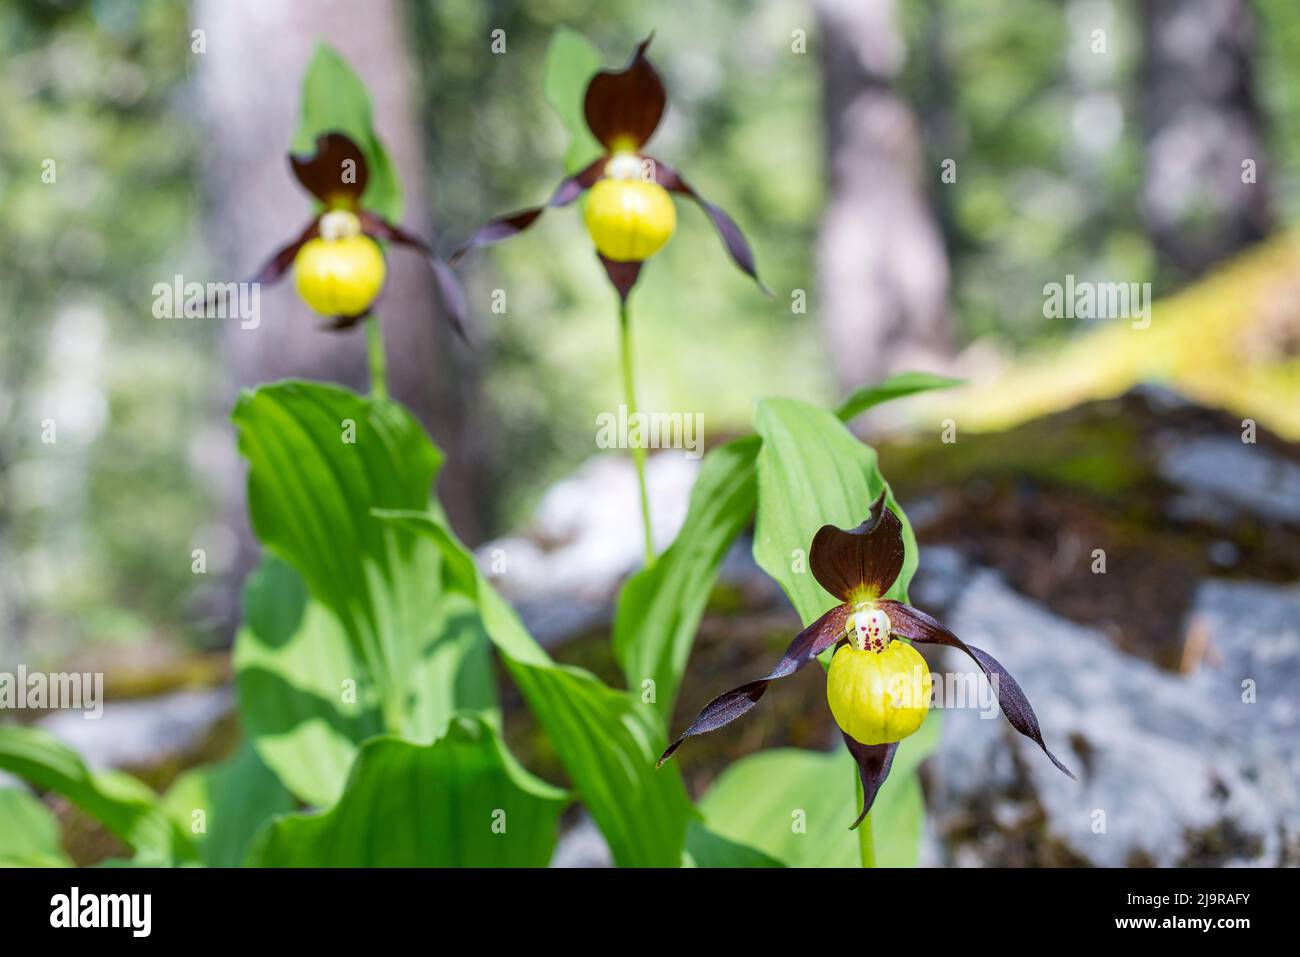 Cypripedium calceolus is a lady's-slipper orchid, and the type species of the genus Cypripedium. Stock Photo